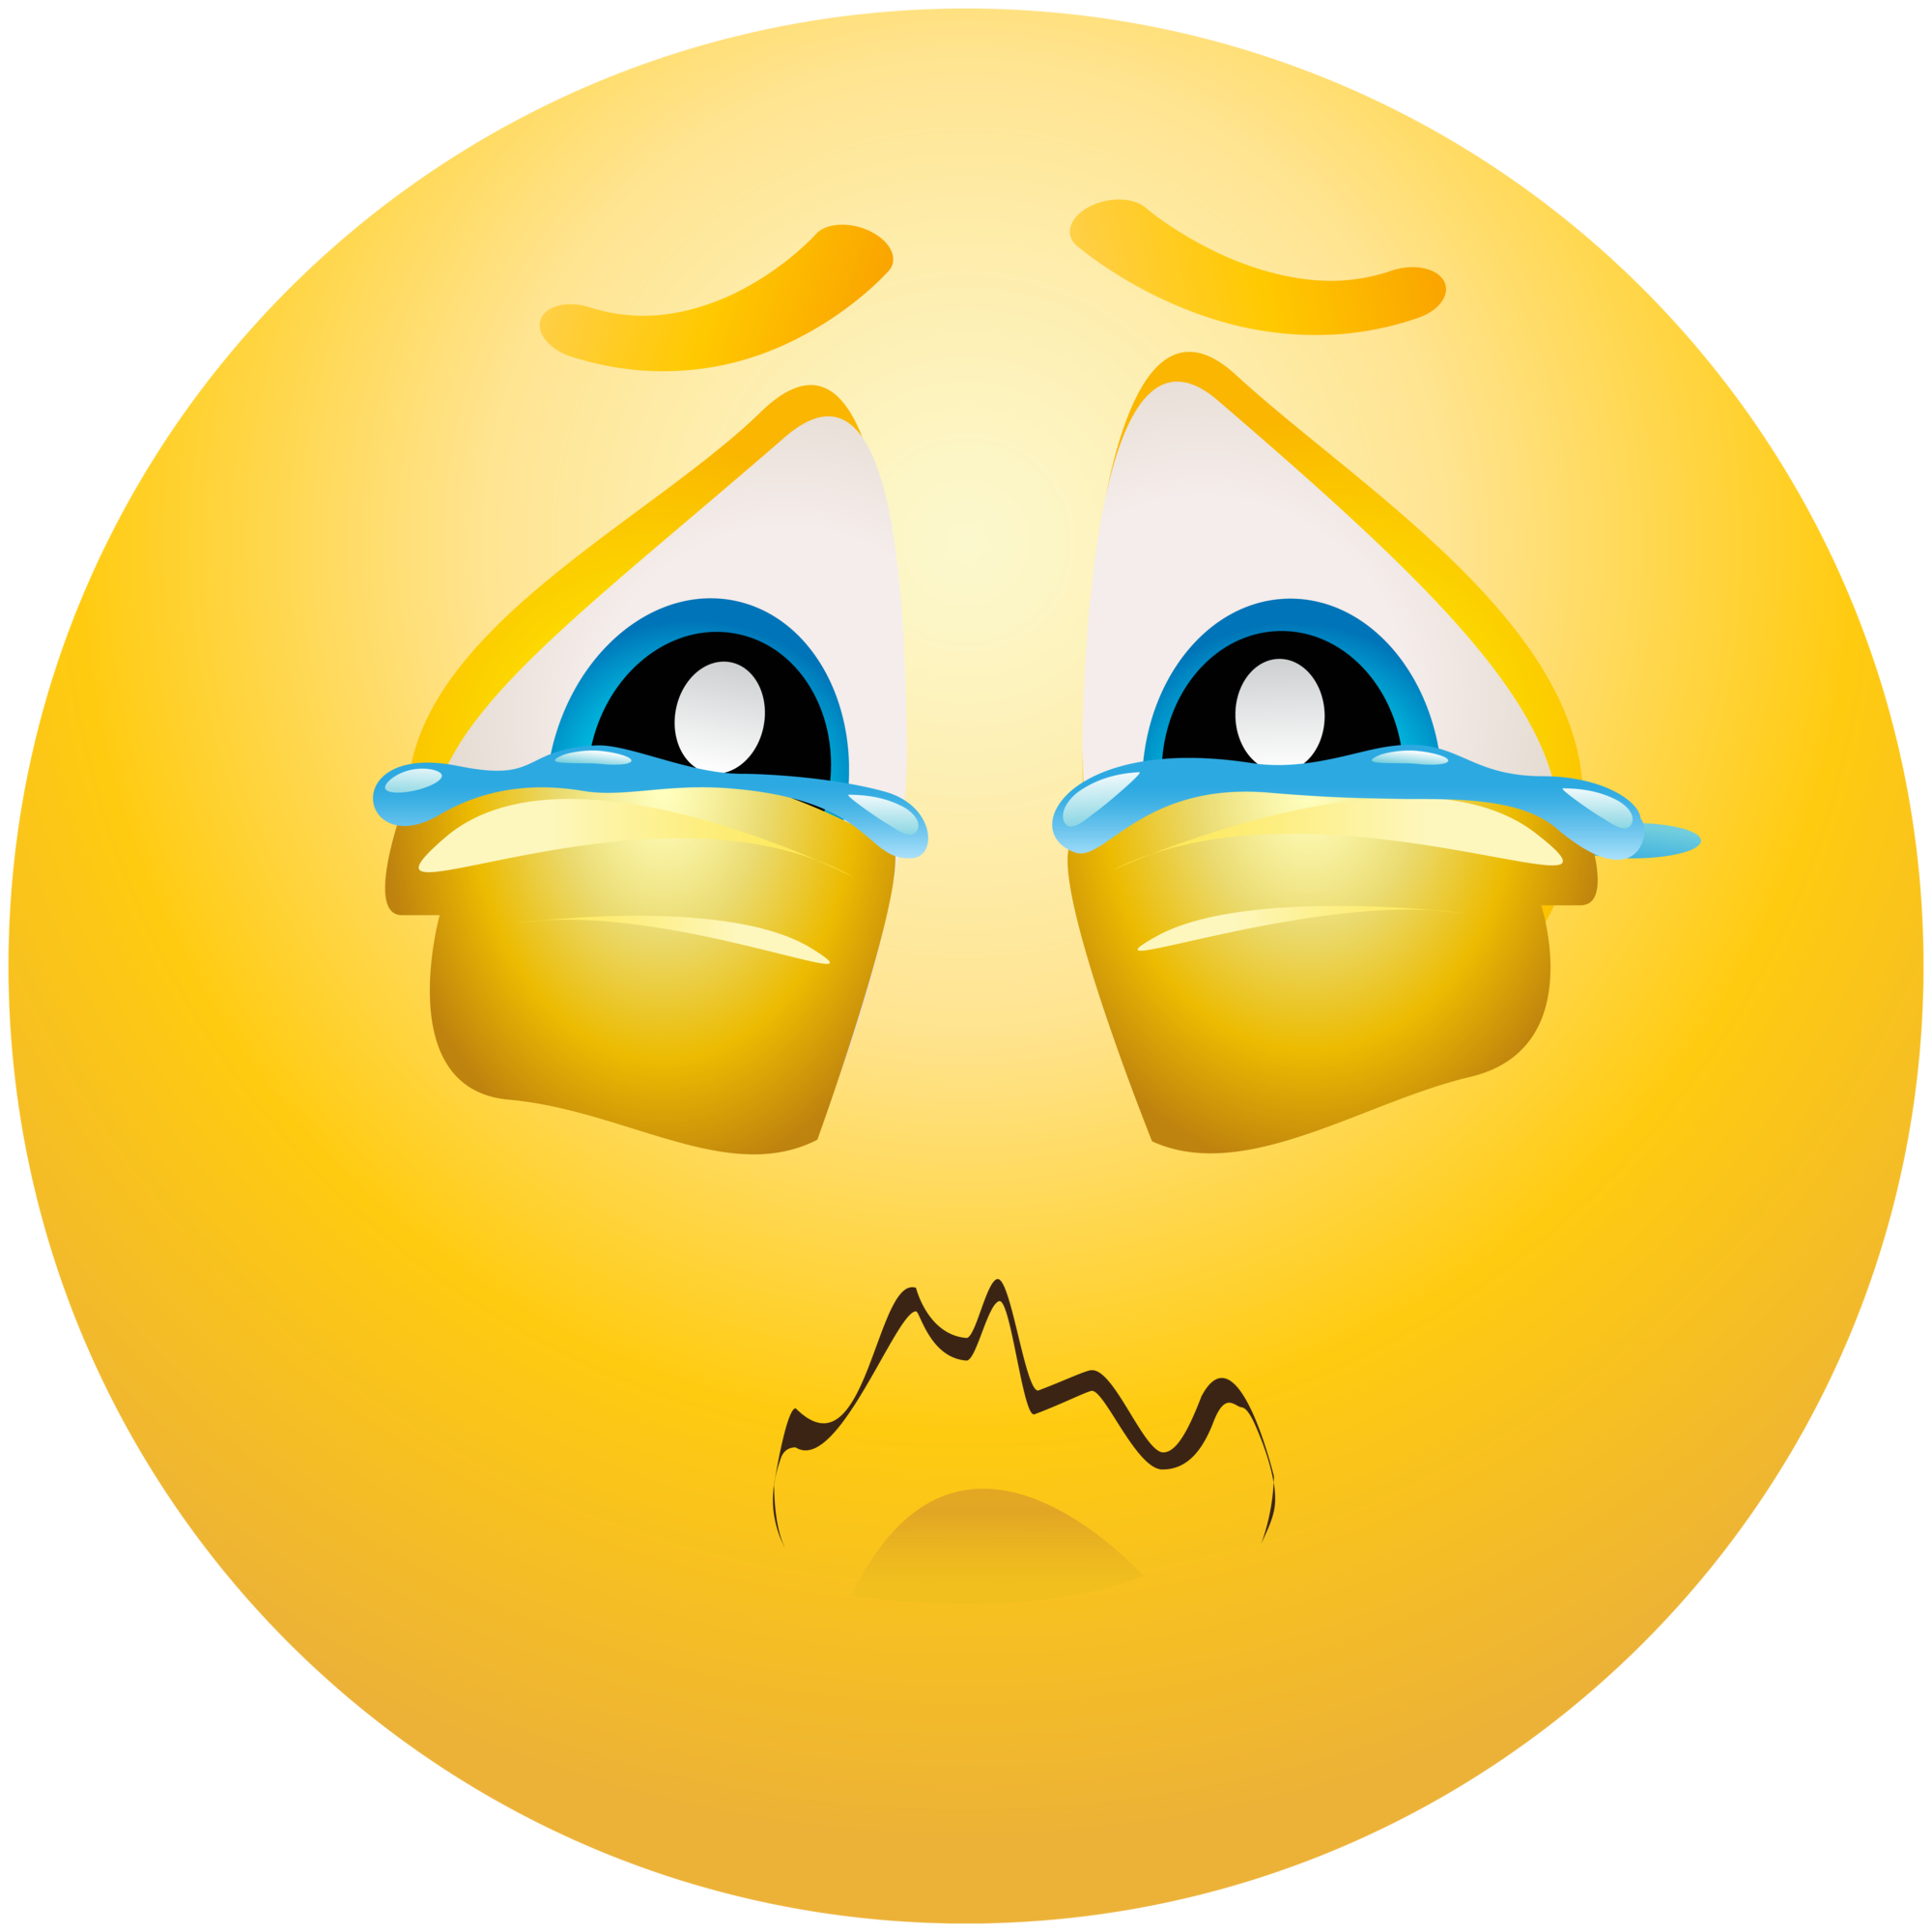 cry clipart transparent